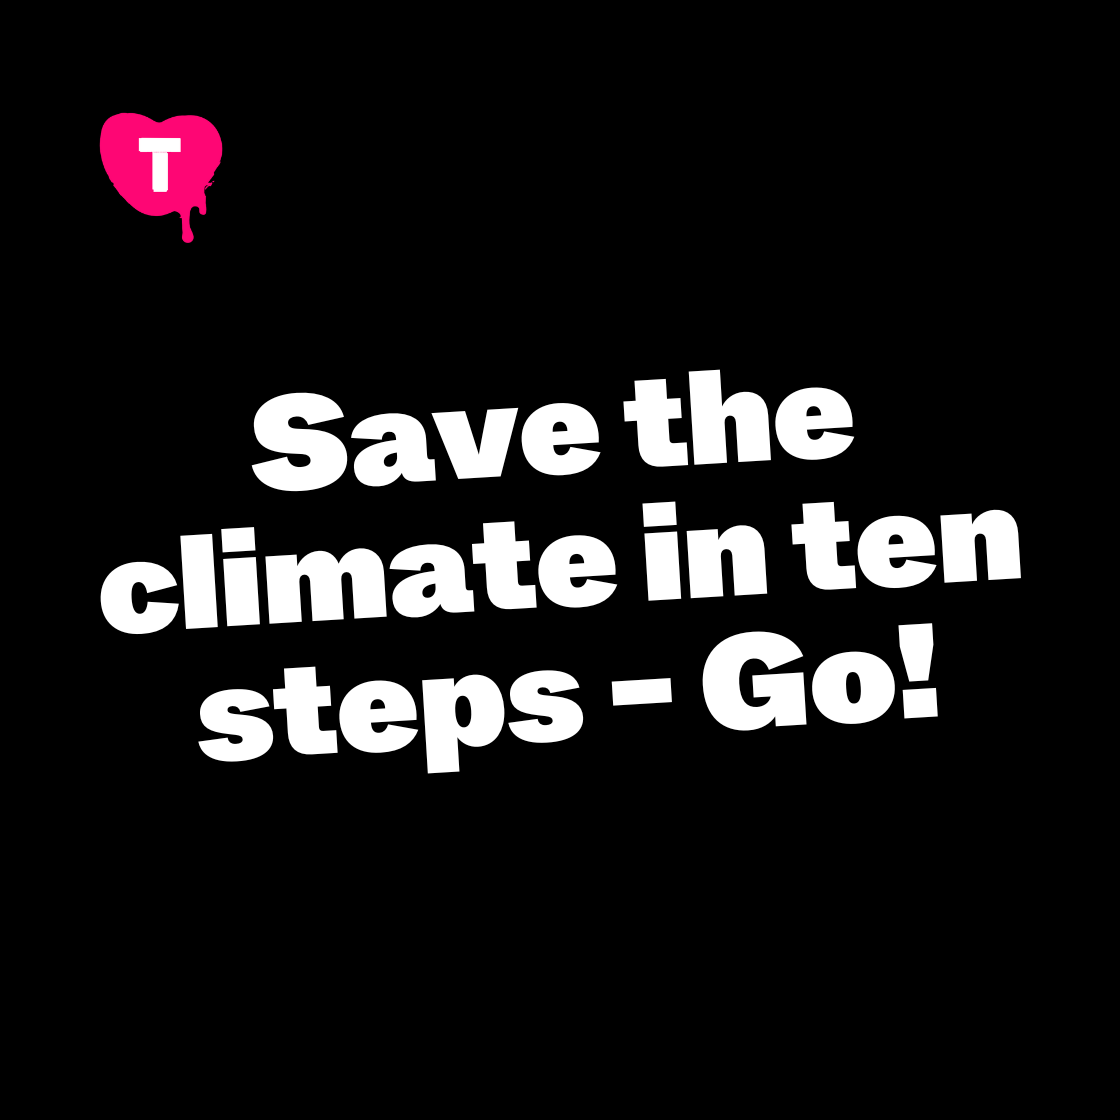 SAVE THE CLIMATE IN TEN STEPS - GO!?